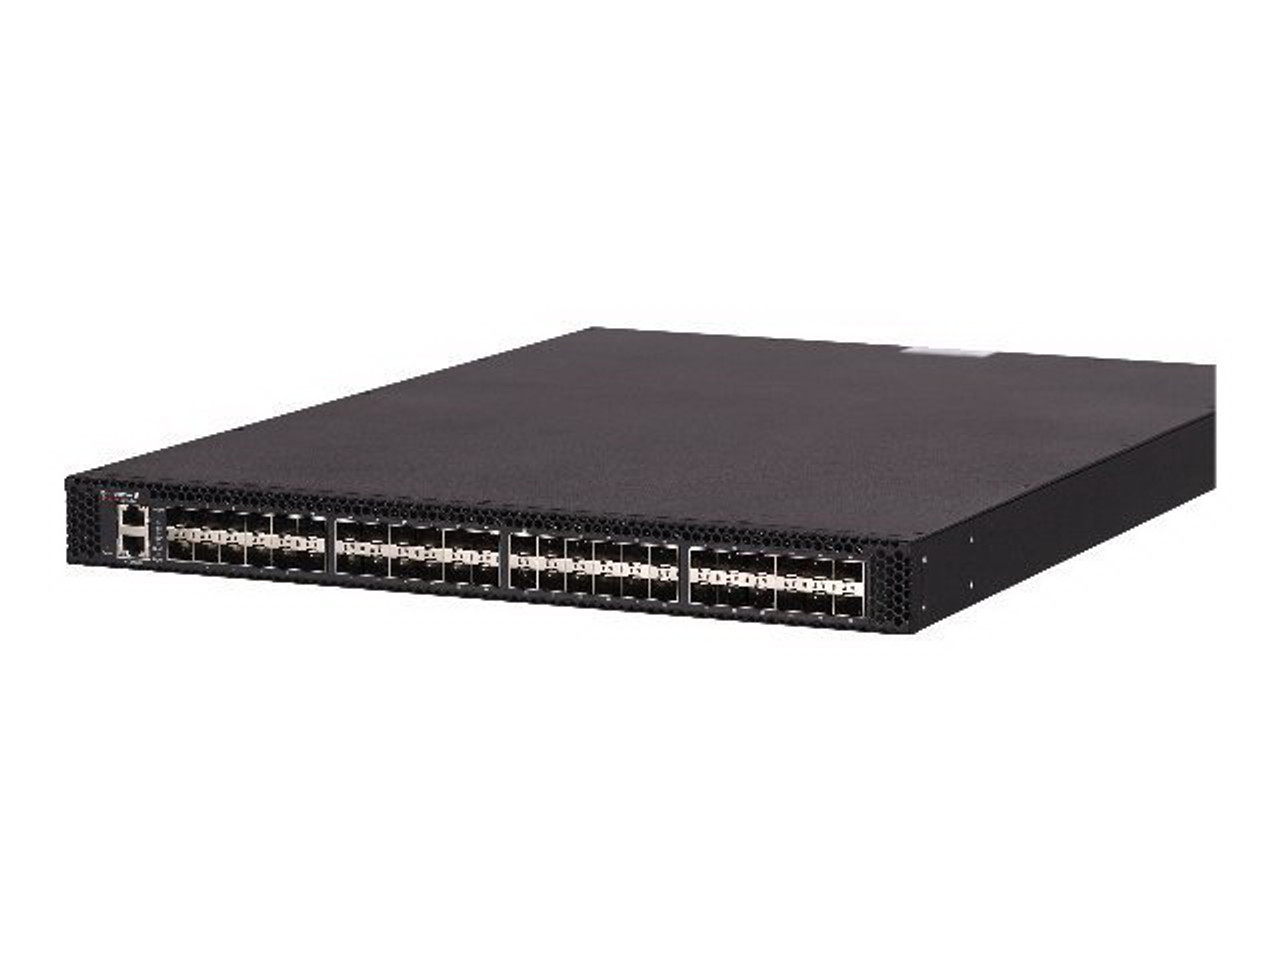 ES-5024XG LG iPECS 10G 24-Ports SFP+ Managed ToR Switch with Redundant Power option and Front to Back Airflow (Refurbished)